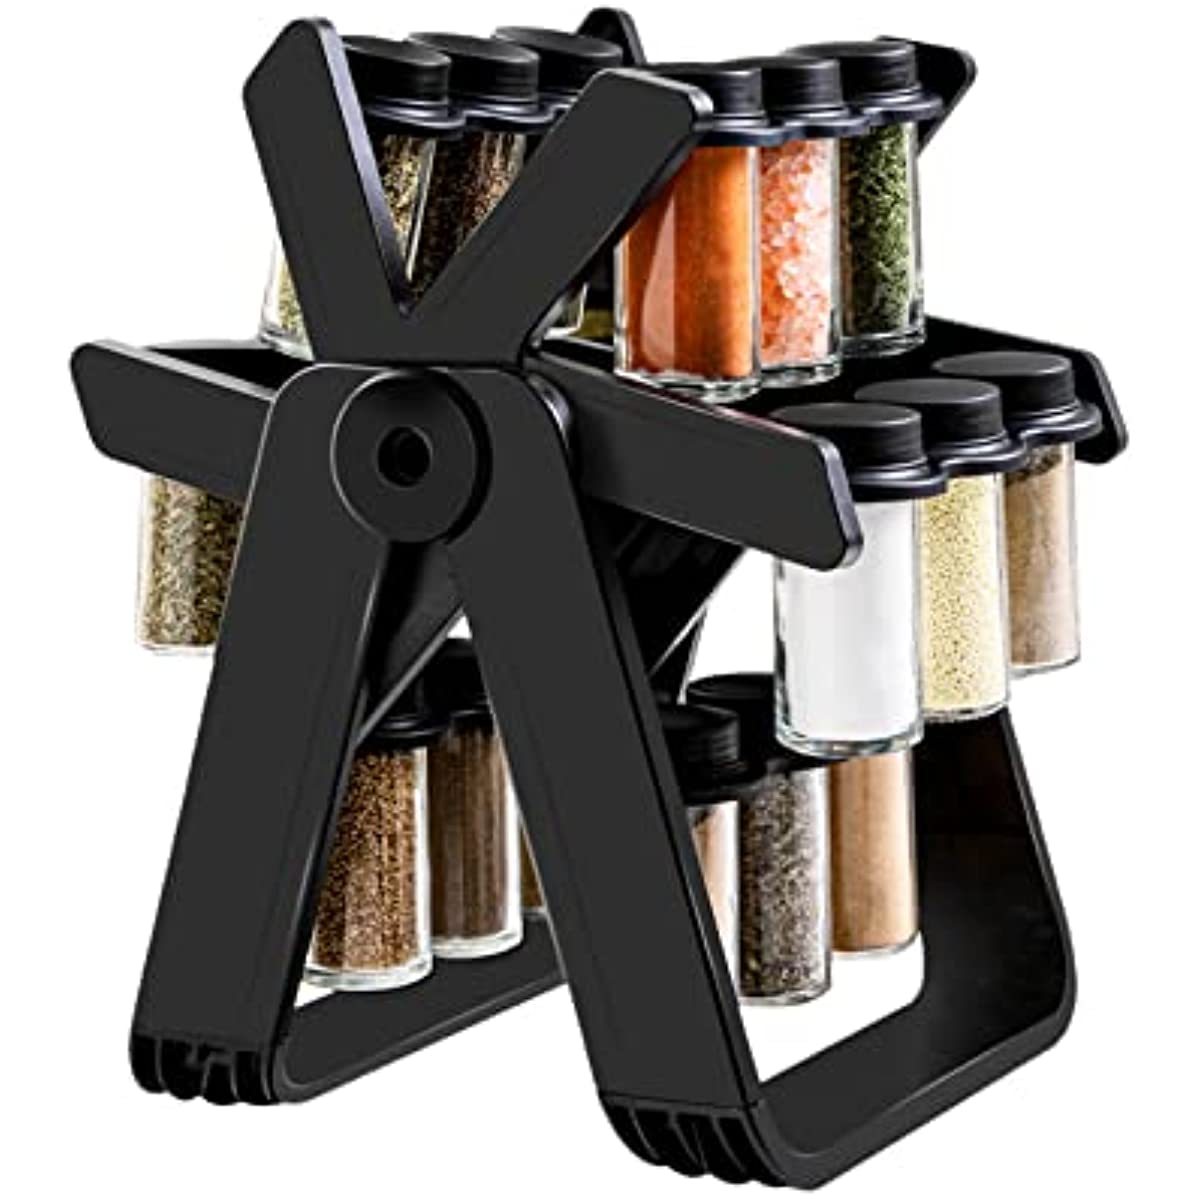 

Spice Rack For 18 Piece Pots 360° Rotating Wheel Swivel Spice Rack Seasoning Organizer Spice Tower Spice Rack For Kitchen Countertop